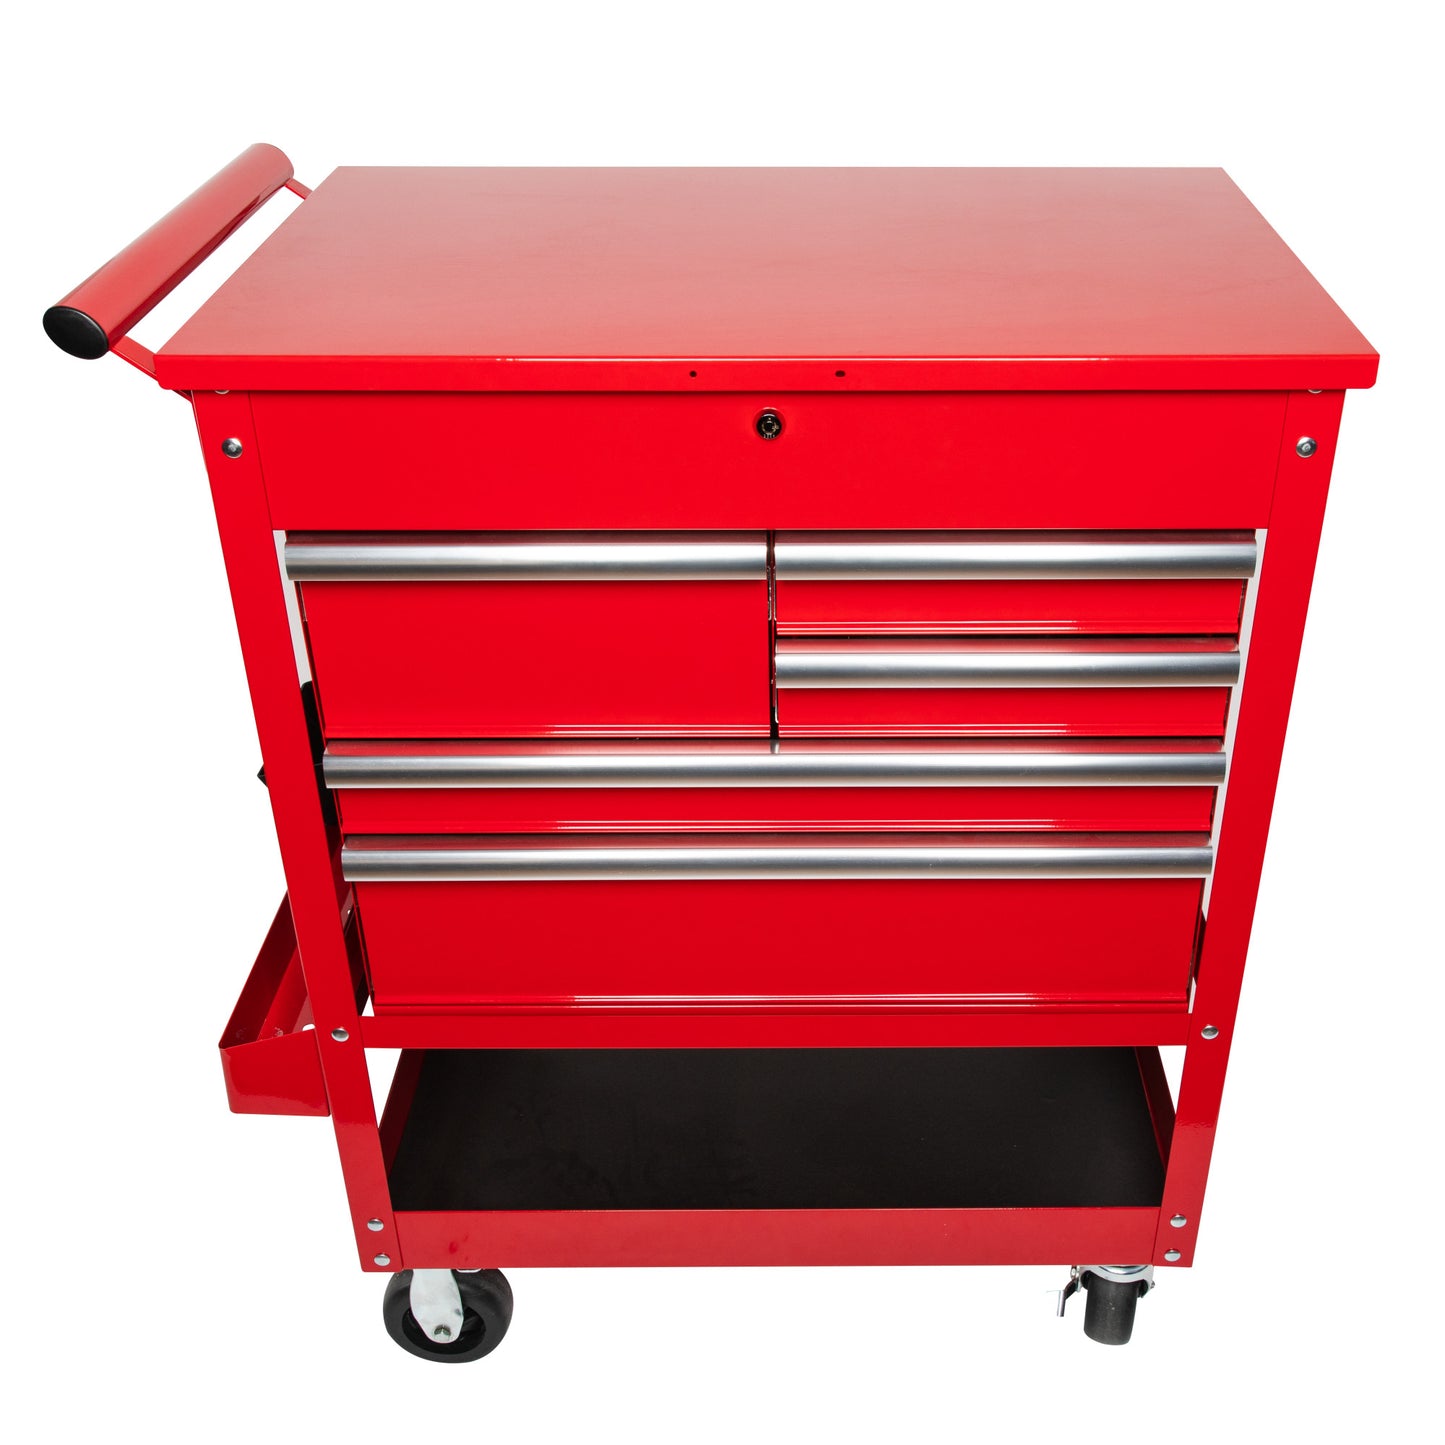 234-Piece Apprentice Automotive Technician 5-Drawer Tool Cart with Tools